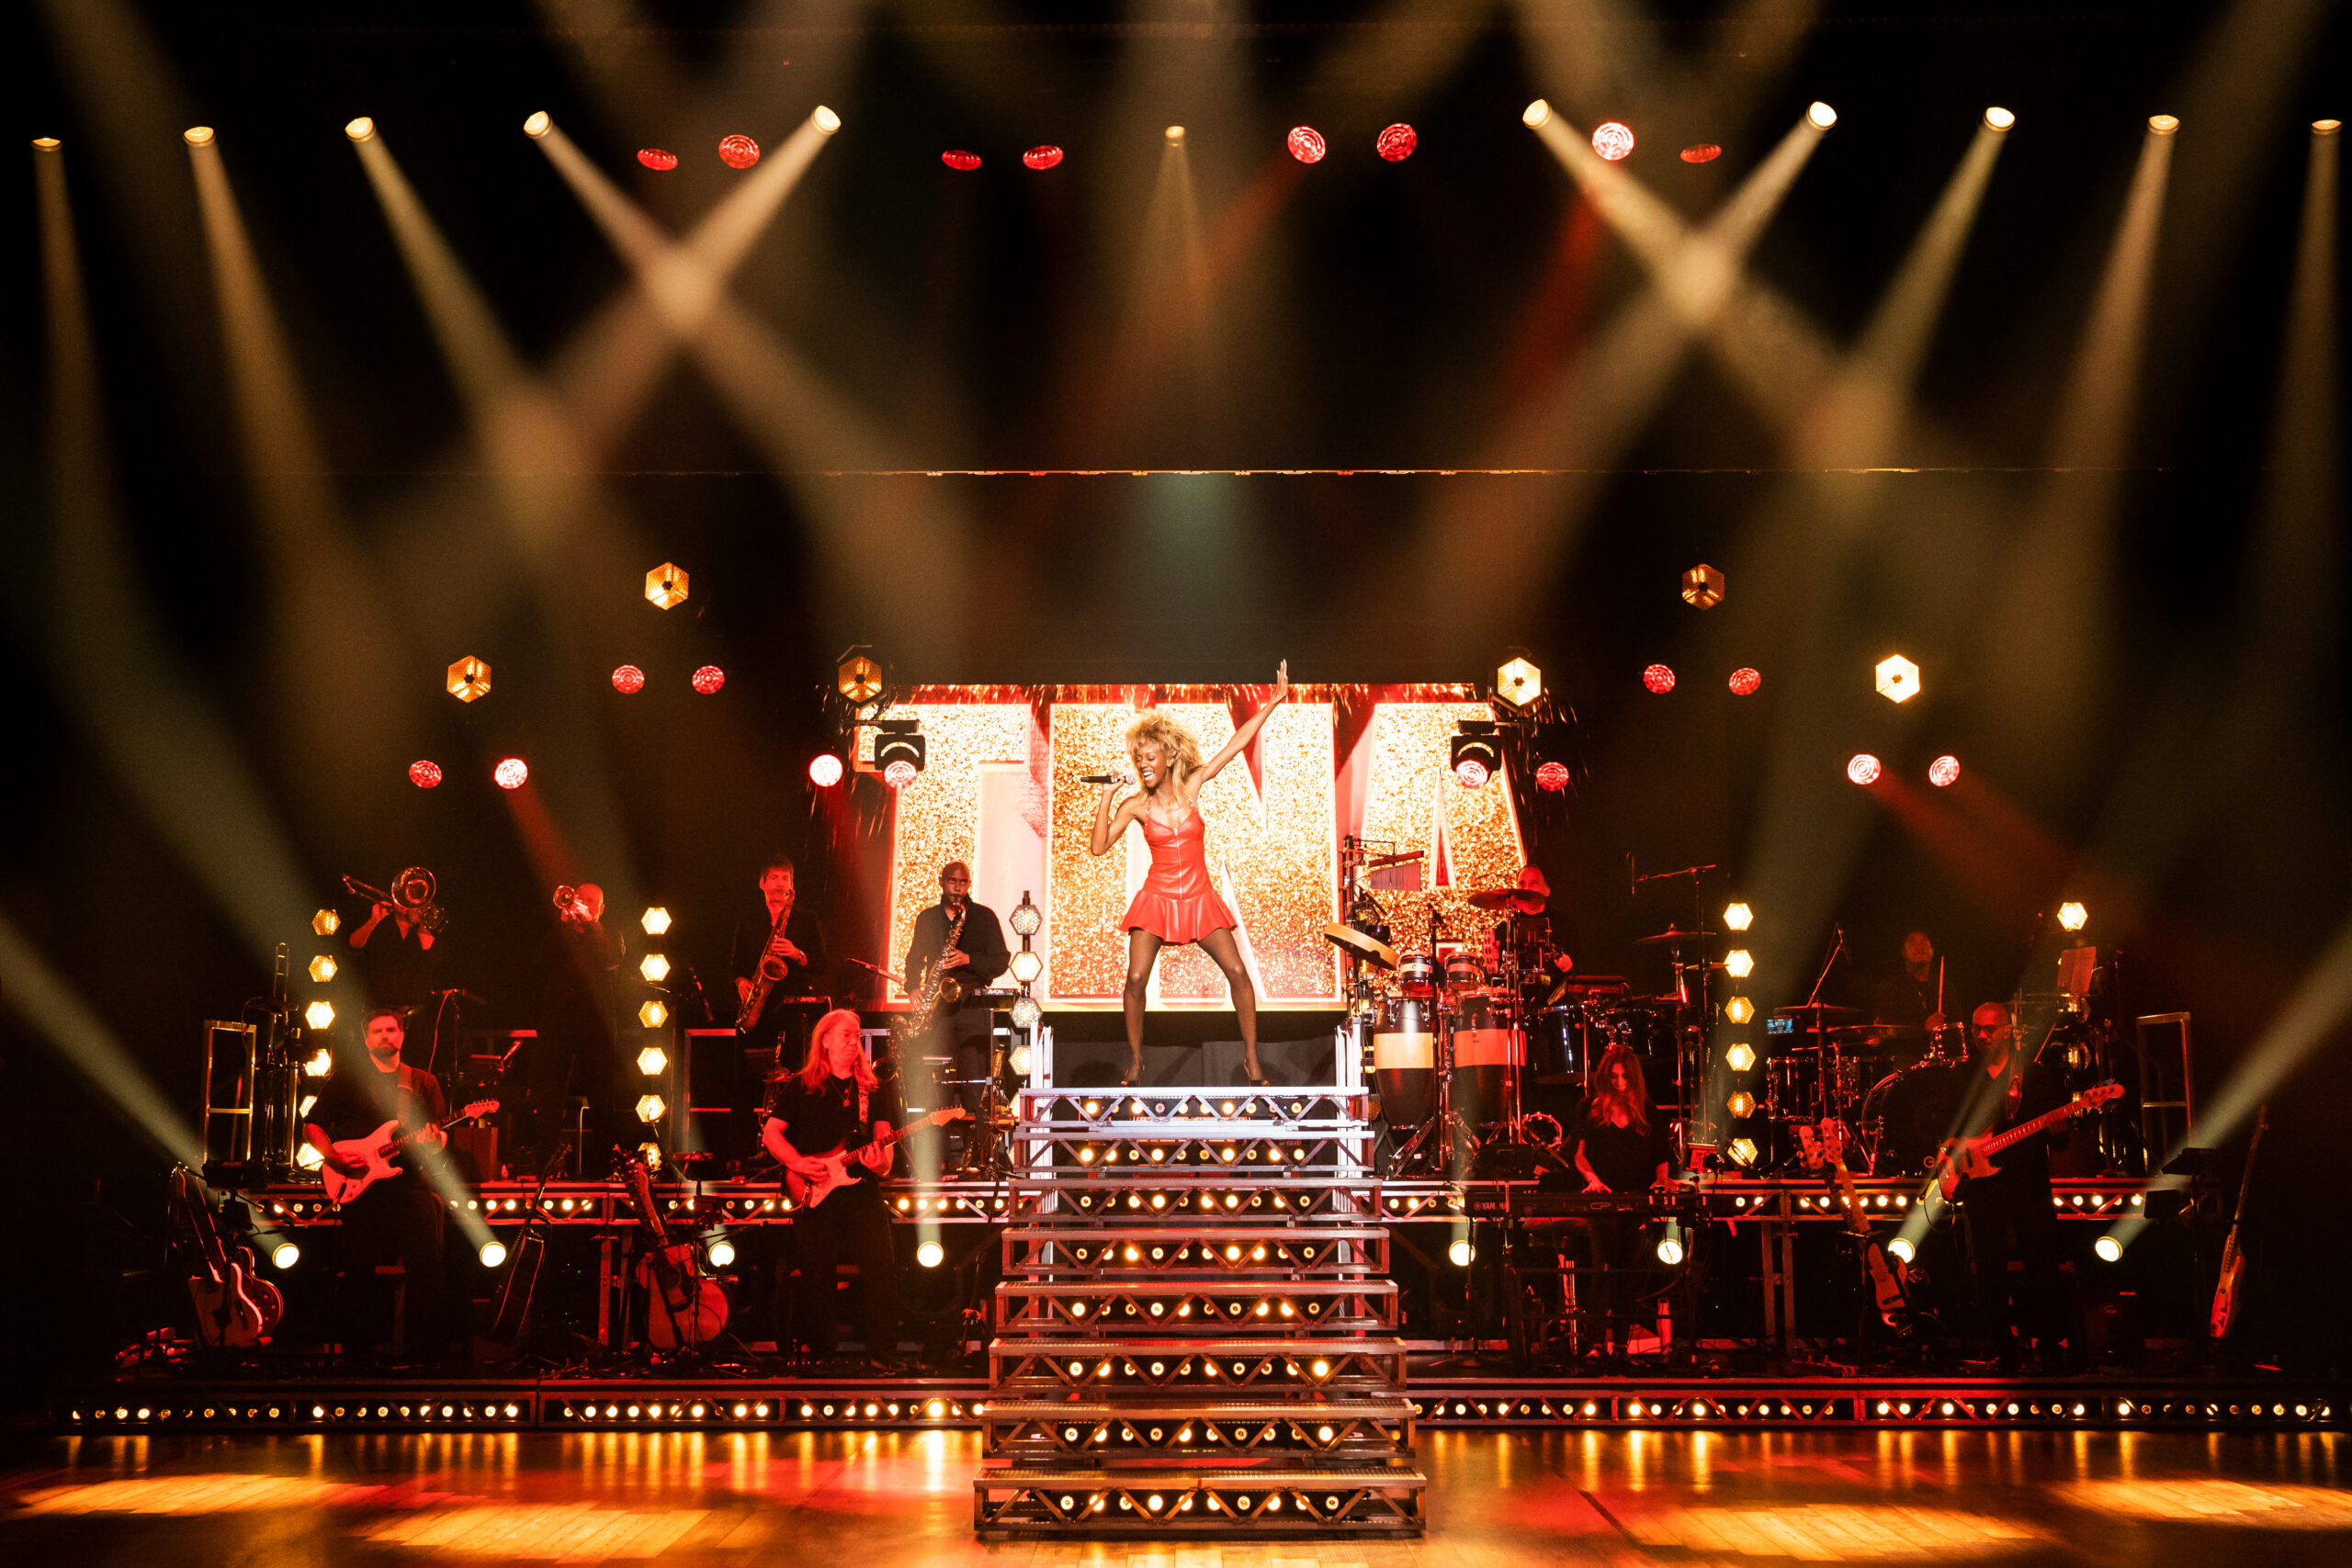 Zurin Villanueva as ‘Tina Turner’ and The TINA Band in the North American touring production of TINA – THE TINA TURNER MUSICAL. Photo by Matthew Murphy and Evan Zimmerman for MurphyMade, 2022